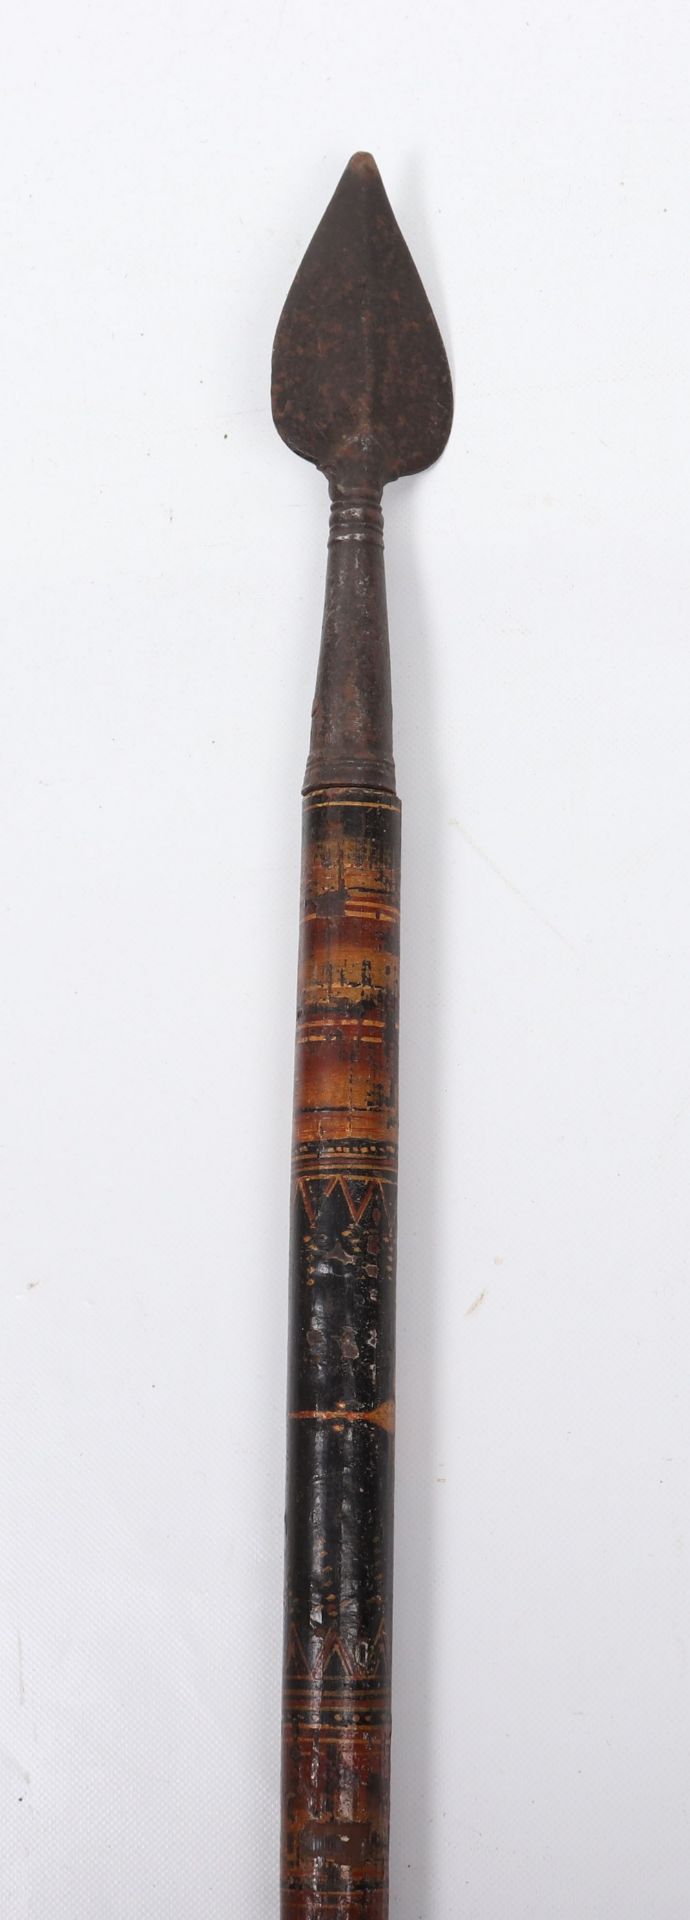 Ceylonese Spear Patisthanaya, Probably 18th or 19th Century - Image 2 of 9